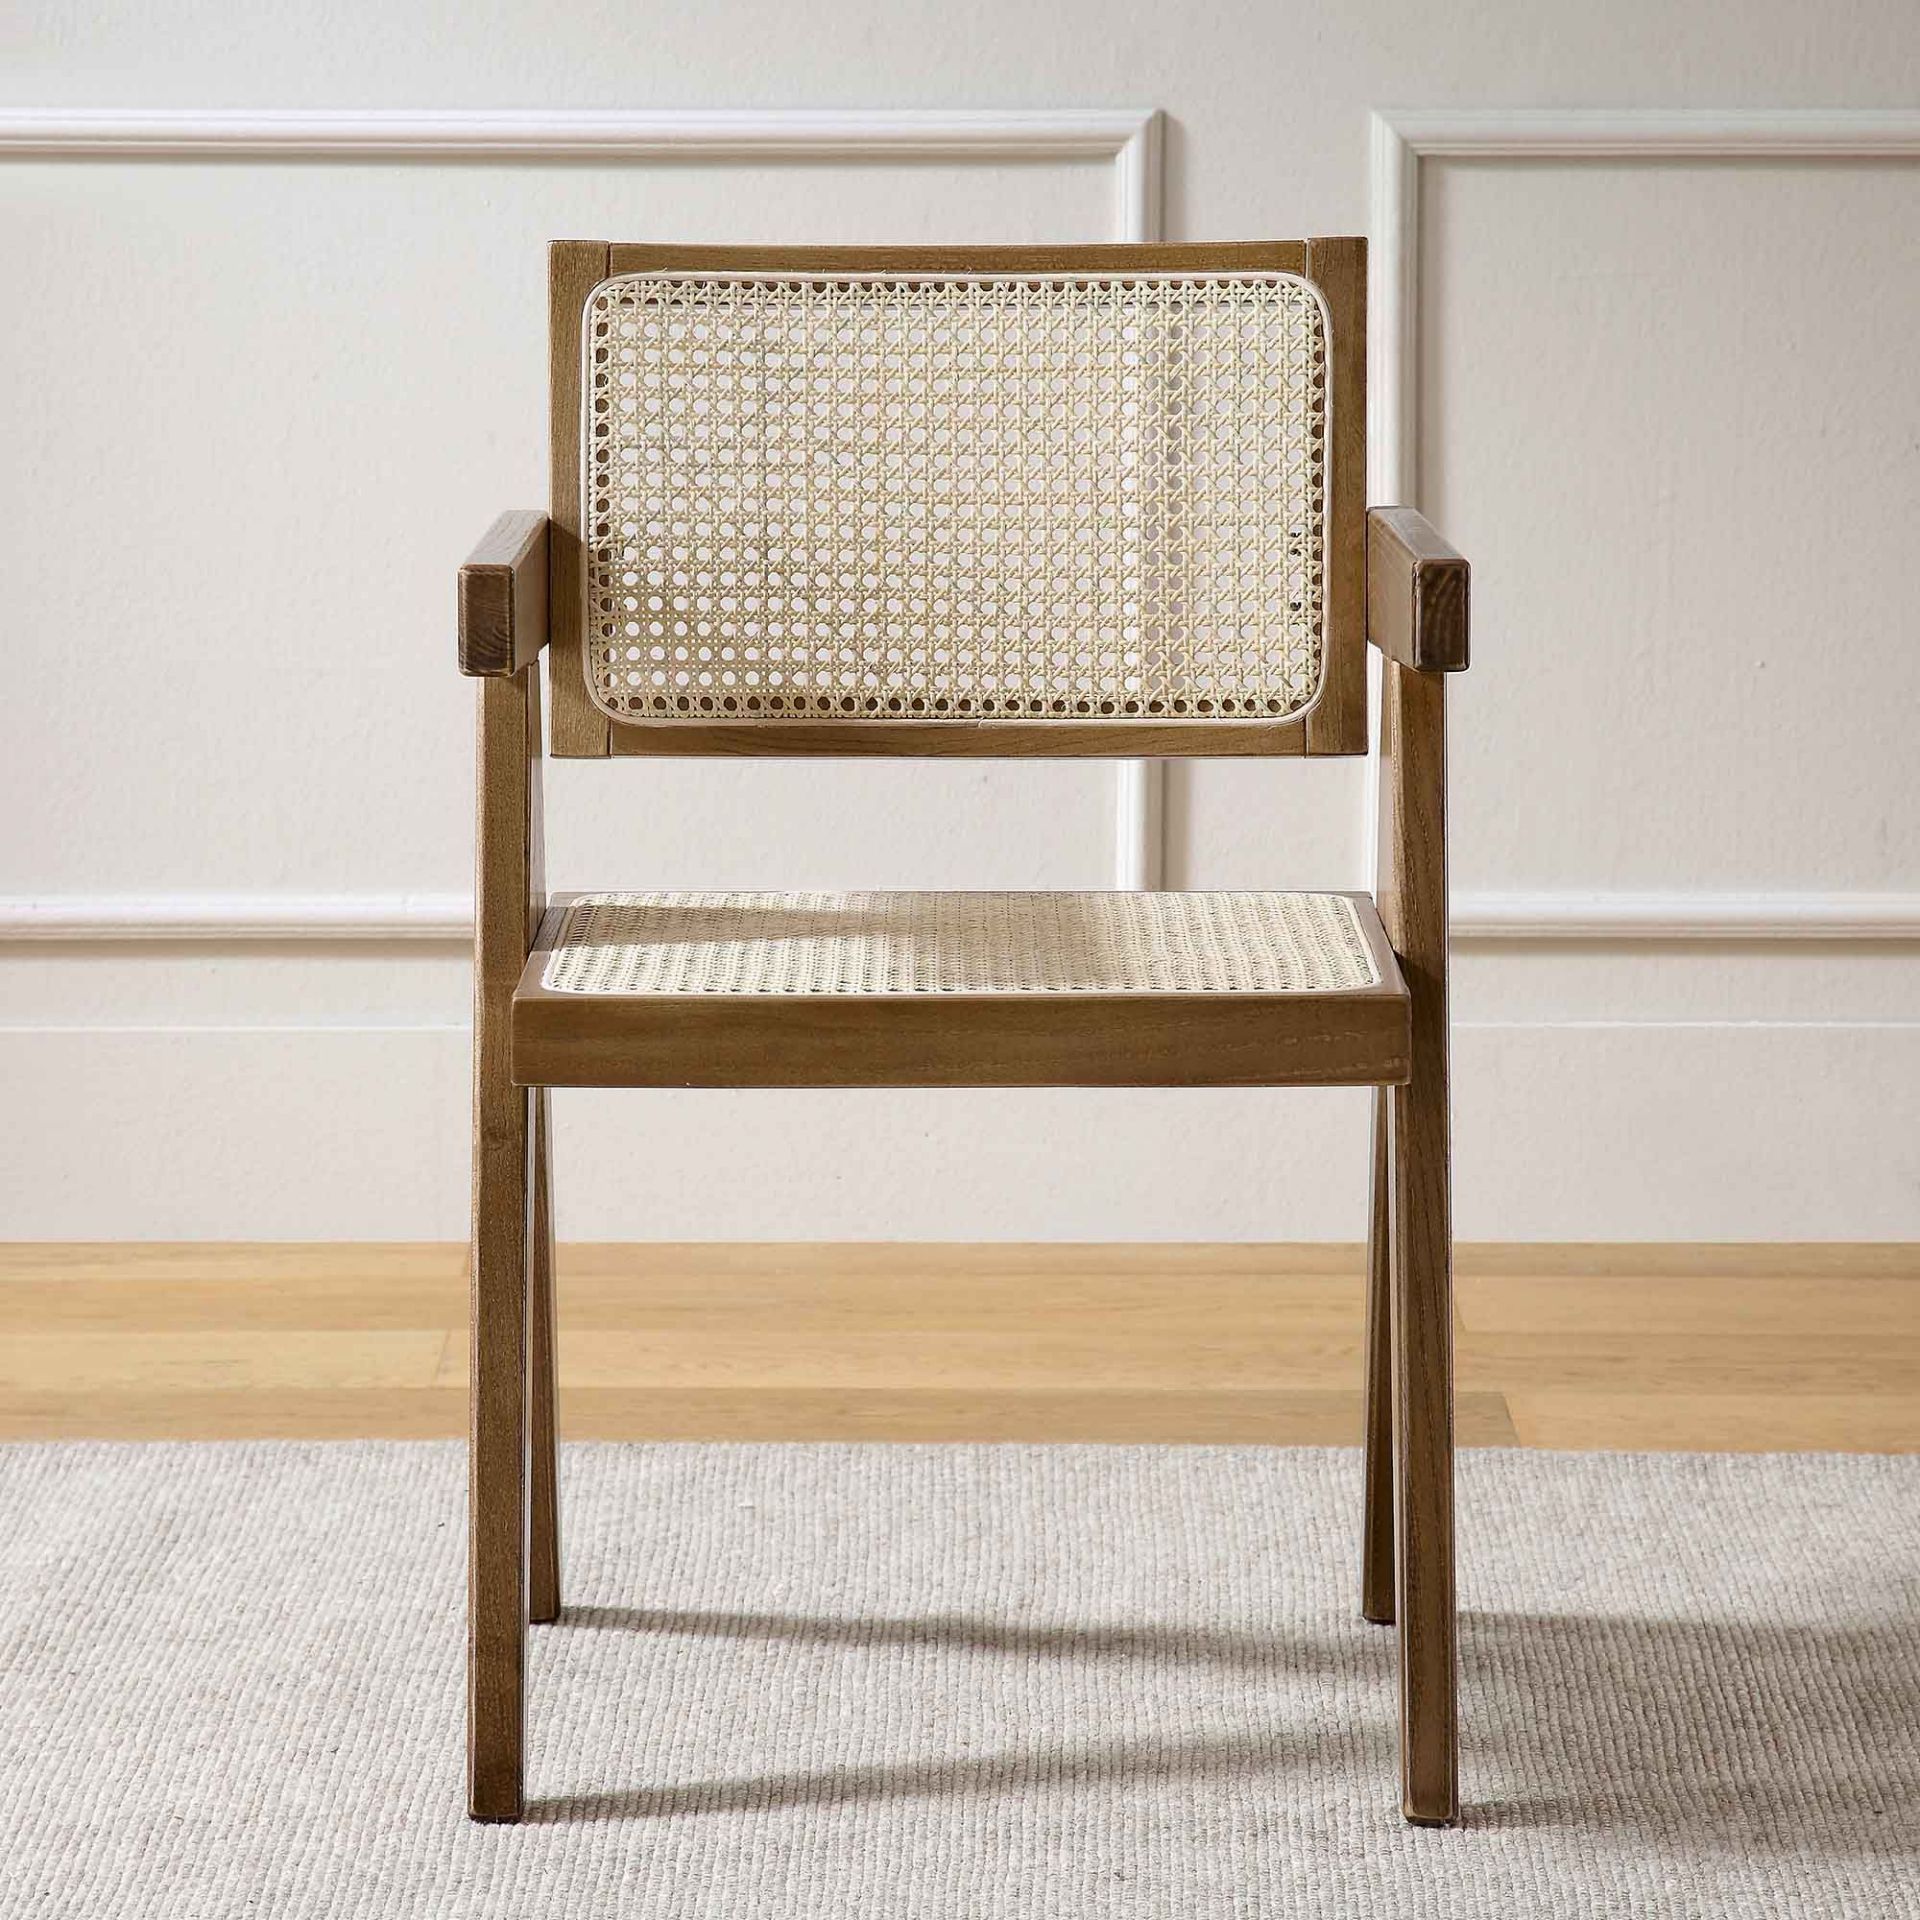 Jeanne Light Walnut Cane Rattan Solid Beech Wood Dining Chair. - SR24. RRP £209.99. The cane - Image 2 of 2